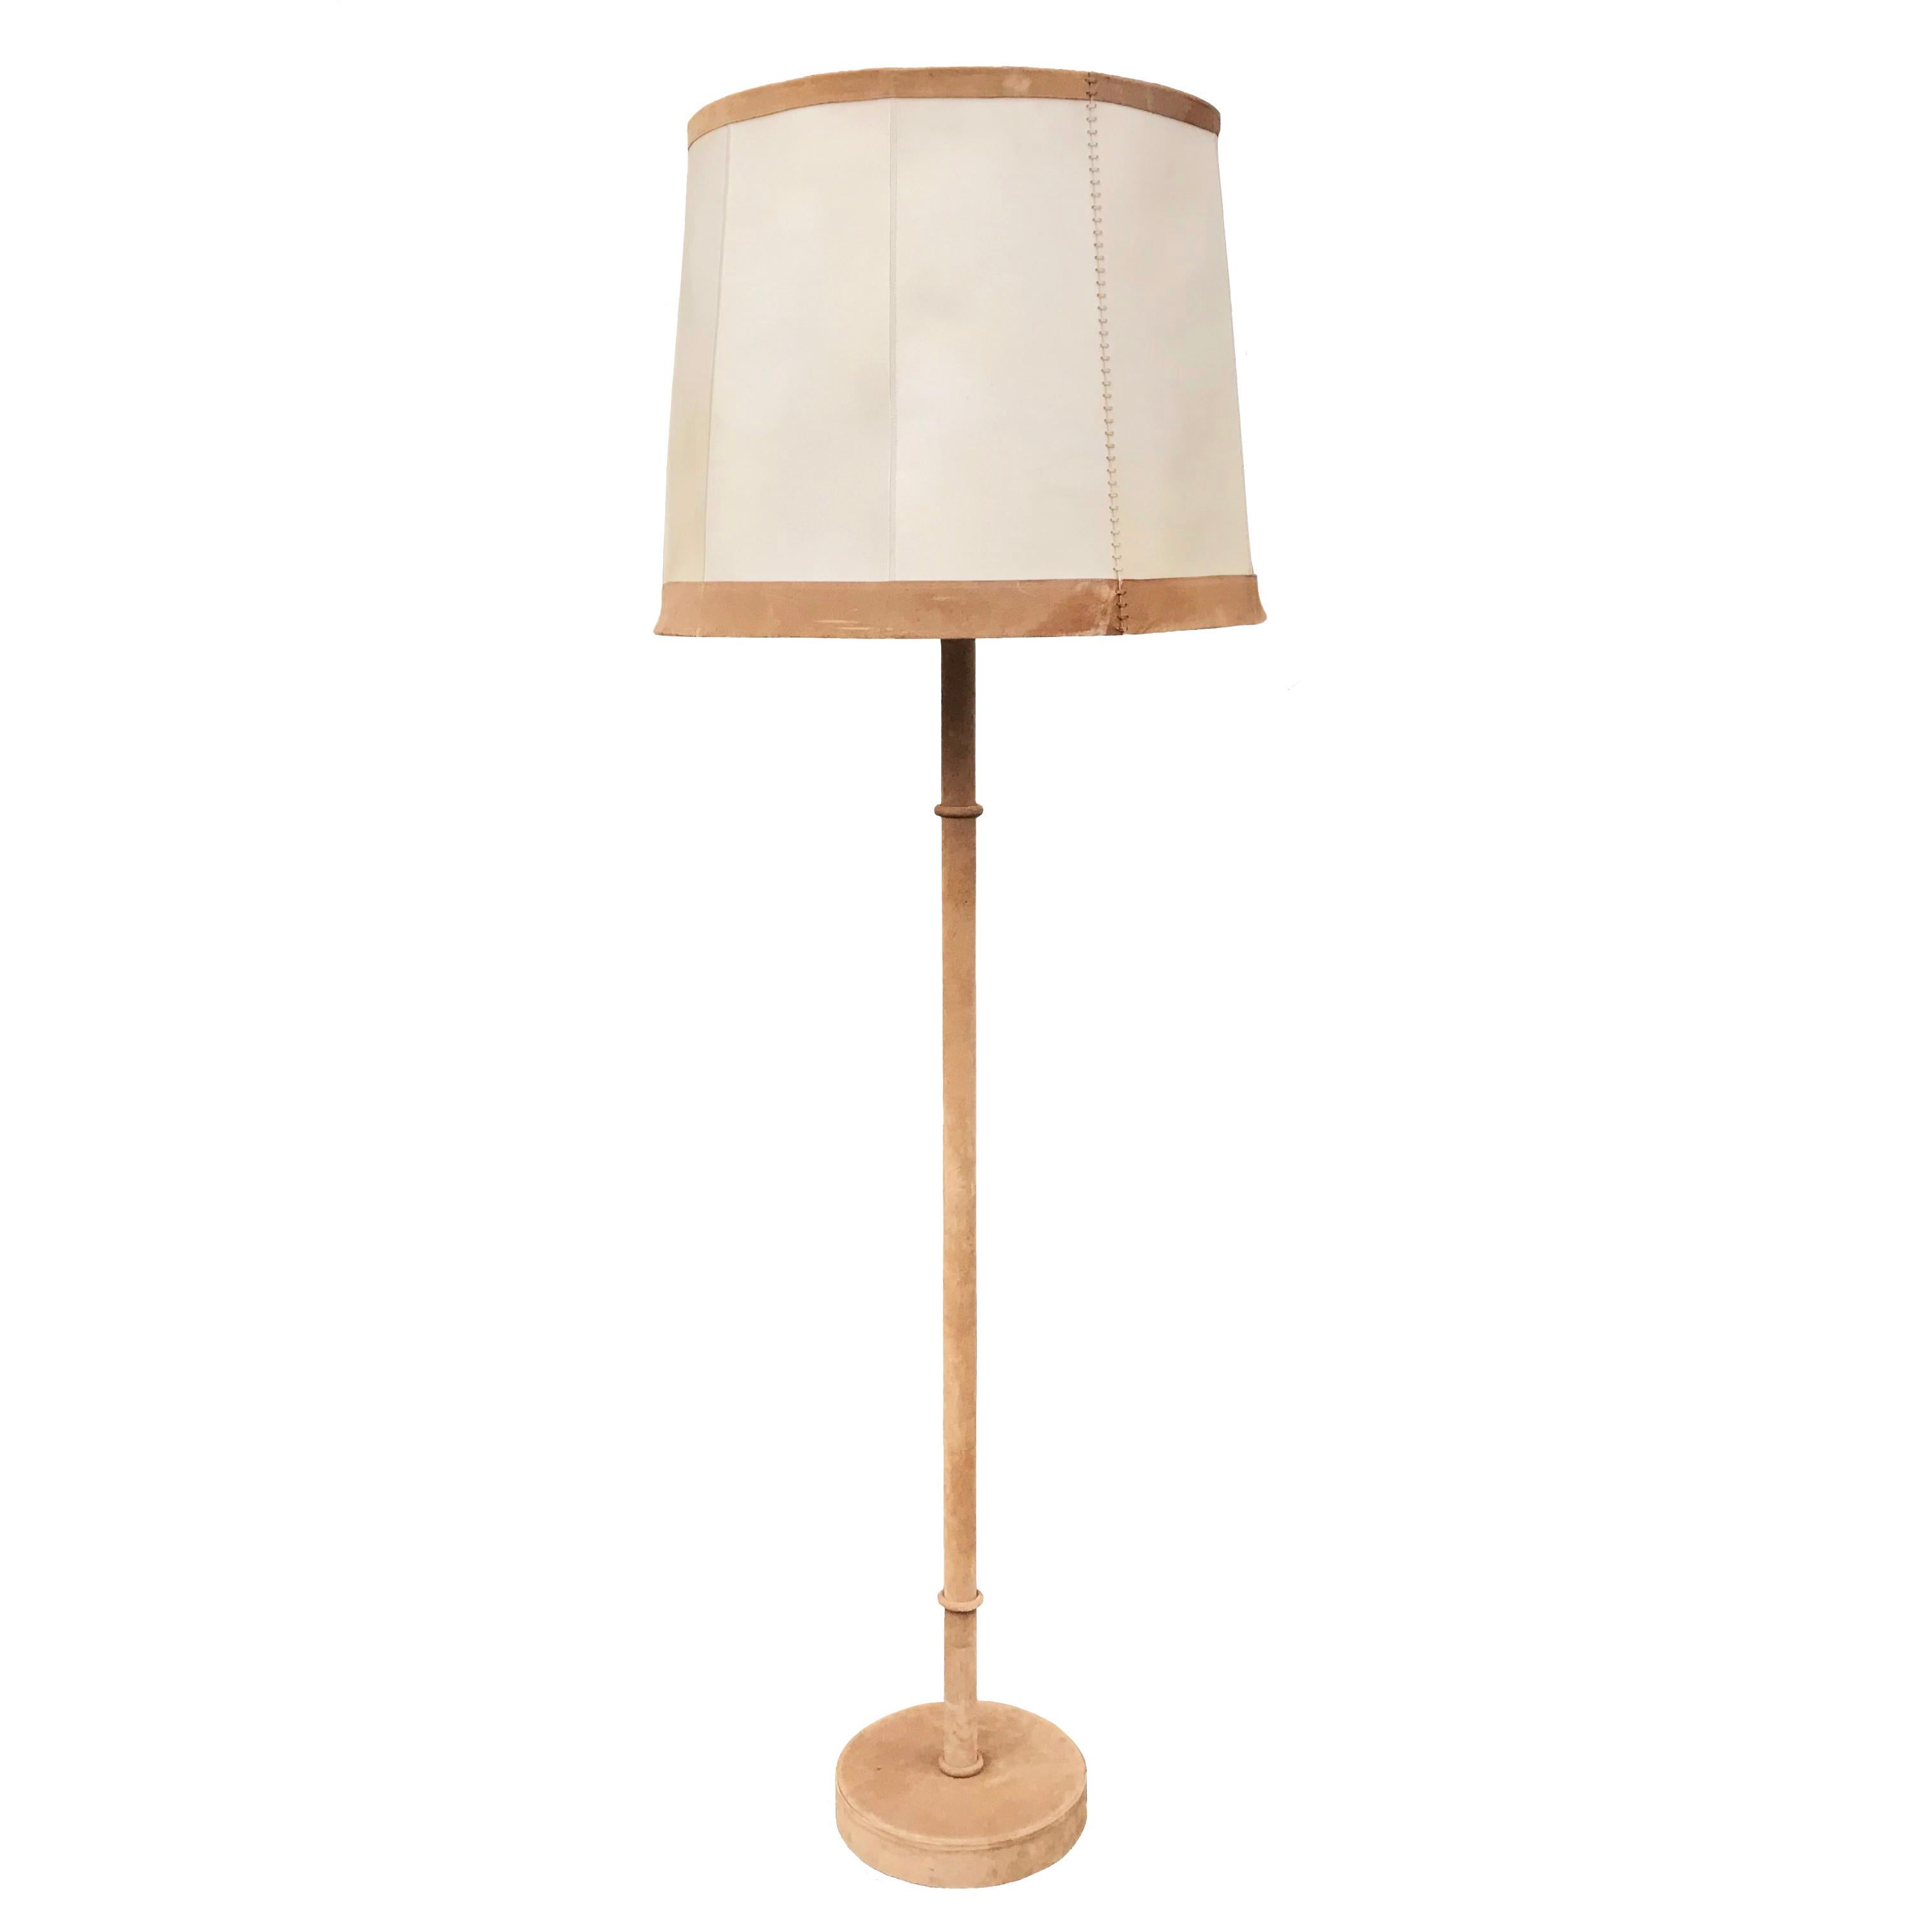 Incredibly chic suede-covered tall standard lamp with its original stitched parchment shade and brass central rod topped off with a suede finial.